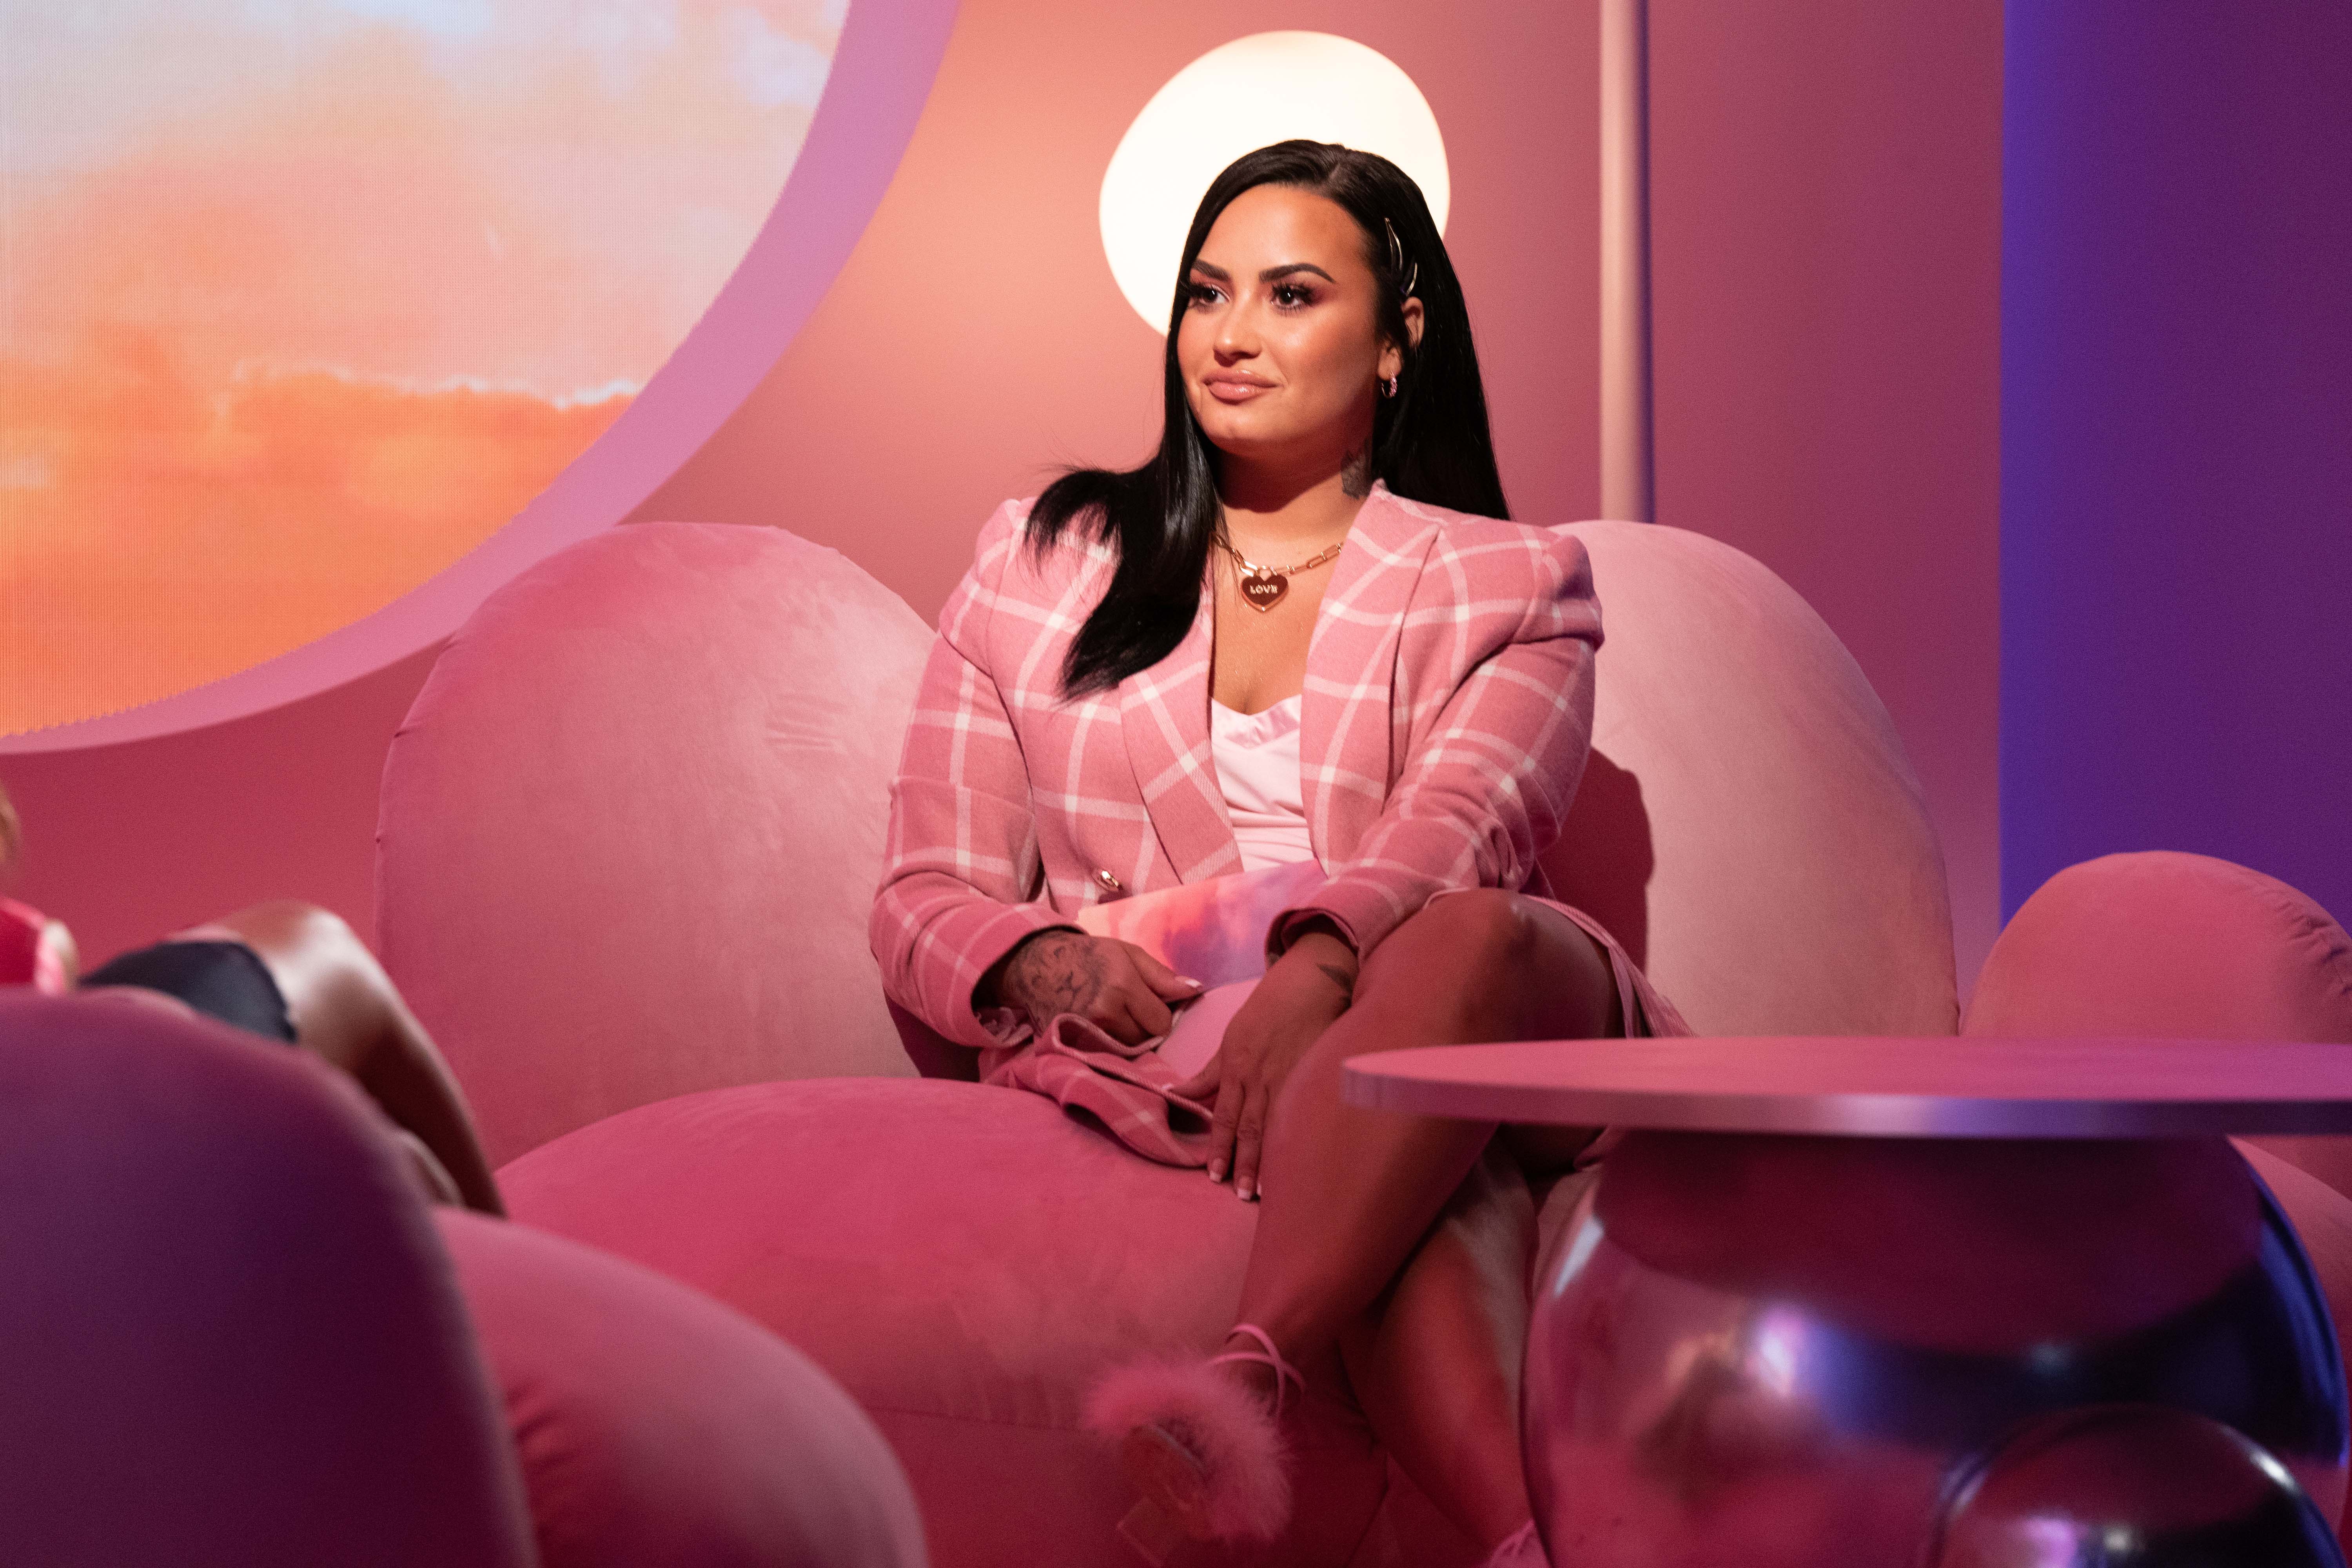 The Next Roku Original is a 10 Minute Talk Show with Demi Lovato